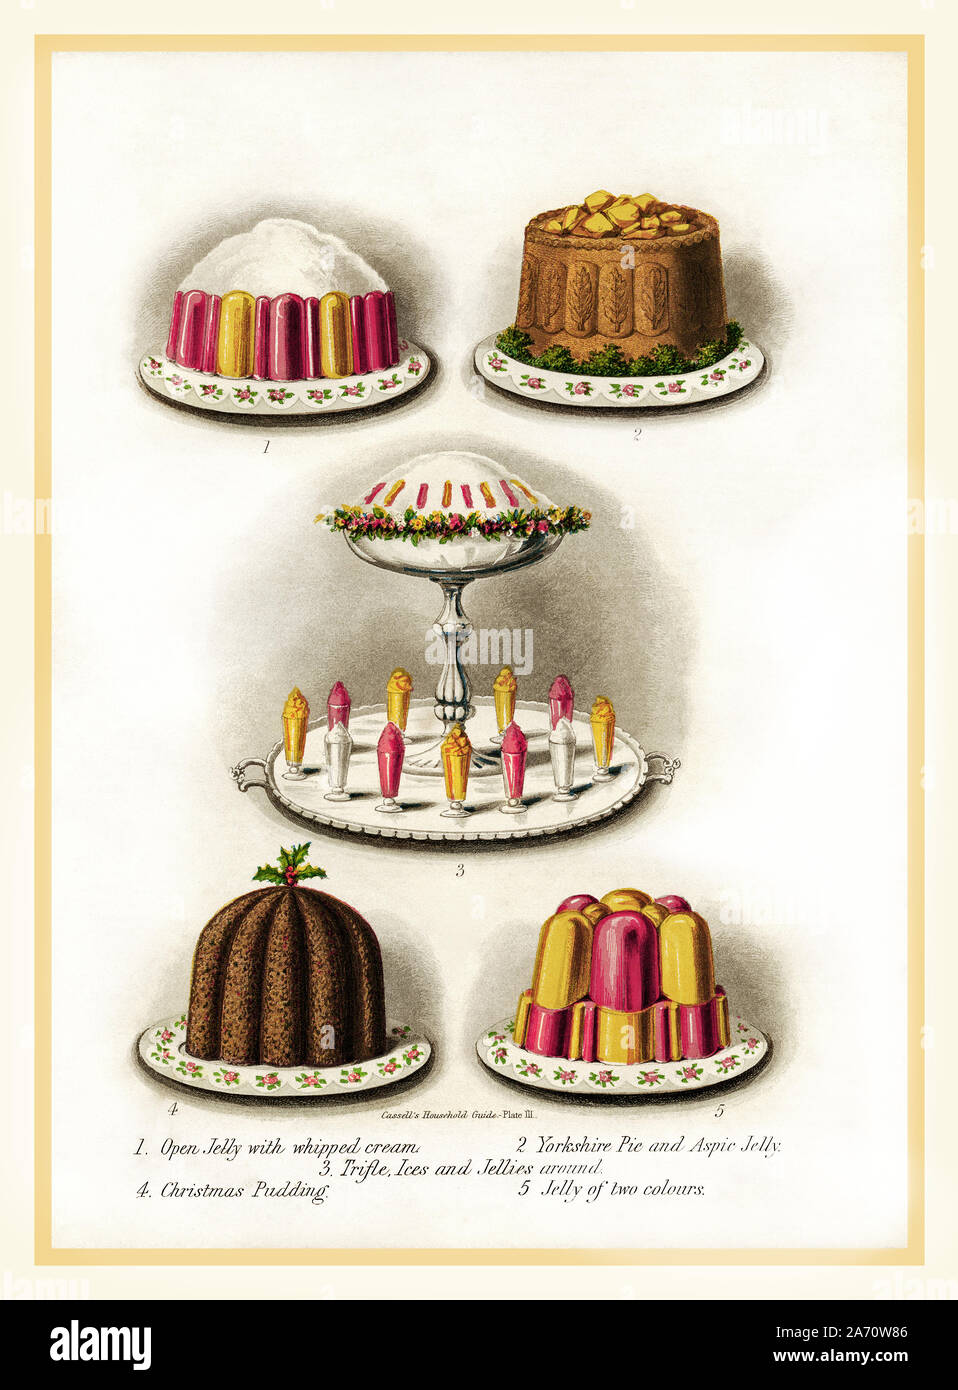 1860’s Vintage Christmas Victorian Food Party Entertaining lithograph.  Victorian Page illustration from Cassell’s Household Guide,  c1869. Jelly with whipped cream,Yorkshire Pie and Aspic Jelly, Trifle, Ices and Jellies, Christmas Pudding, Two colours Jelly Stock Photo